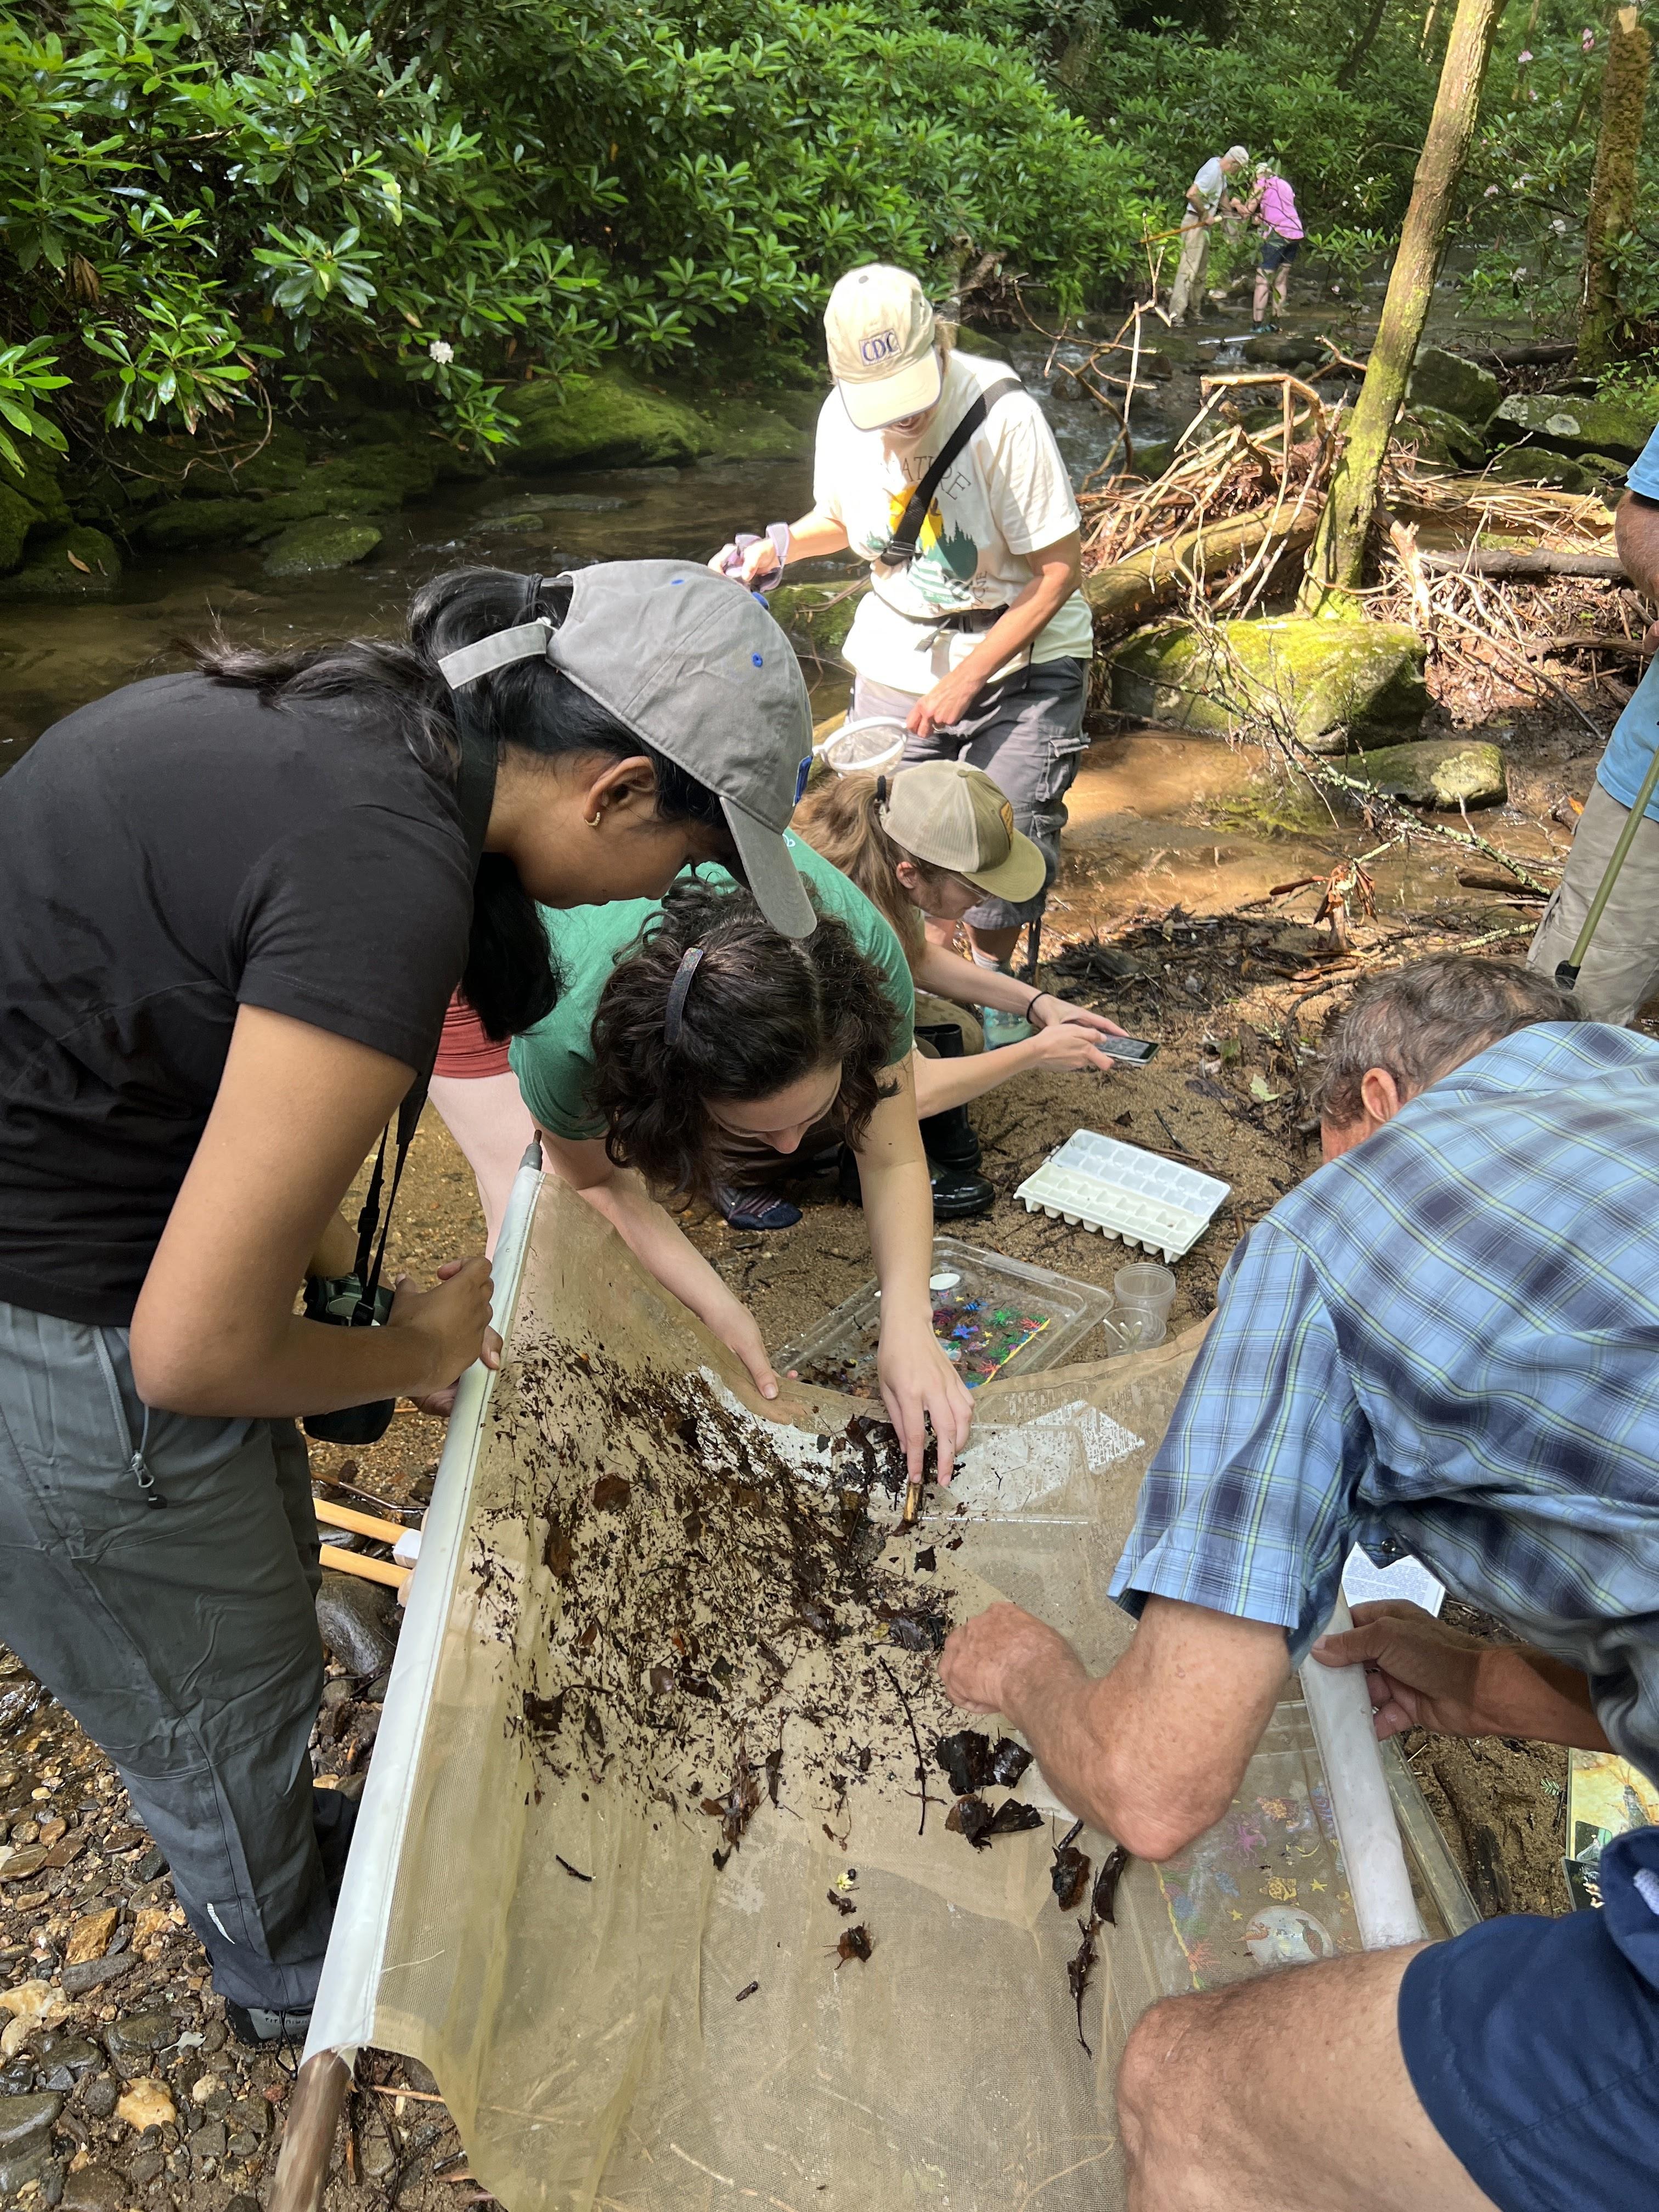 Natasha Jacob participated in a stream ecology walk in the Chattahoochee National Forest.